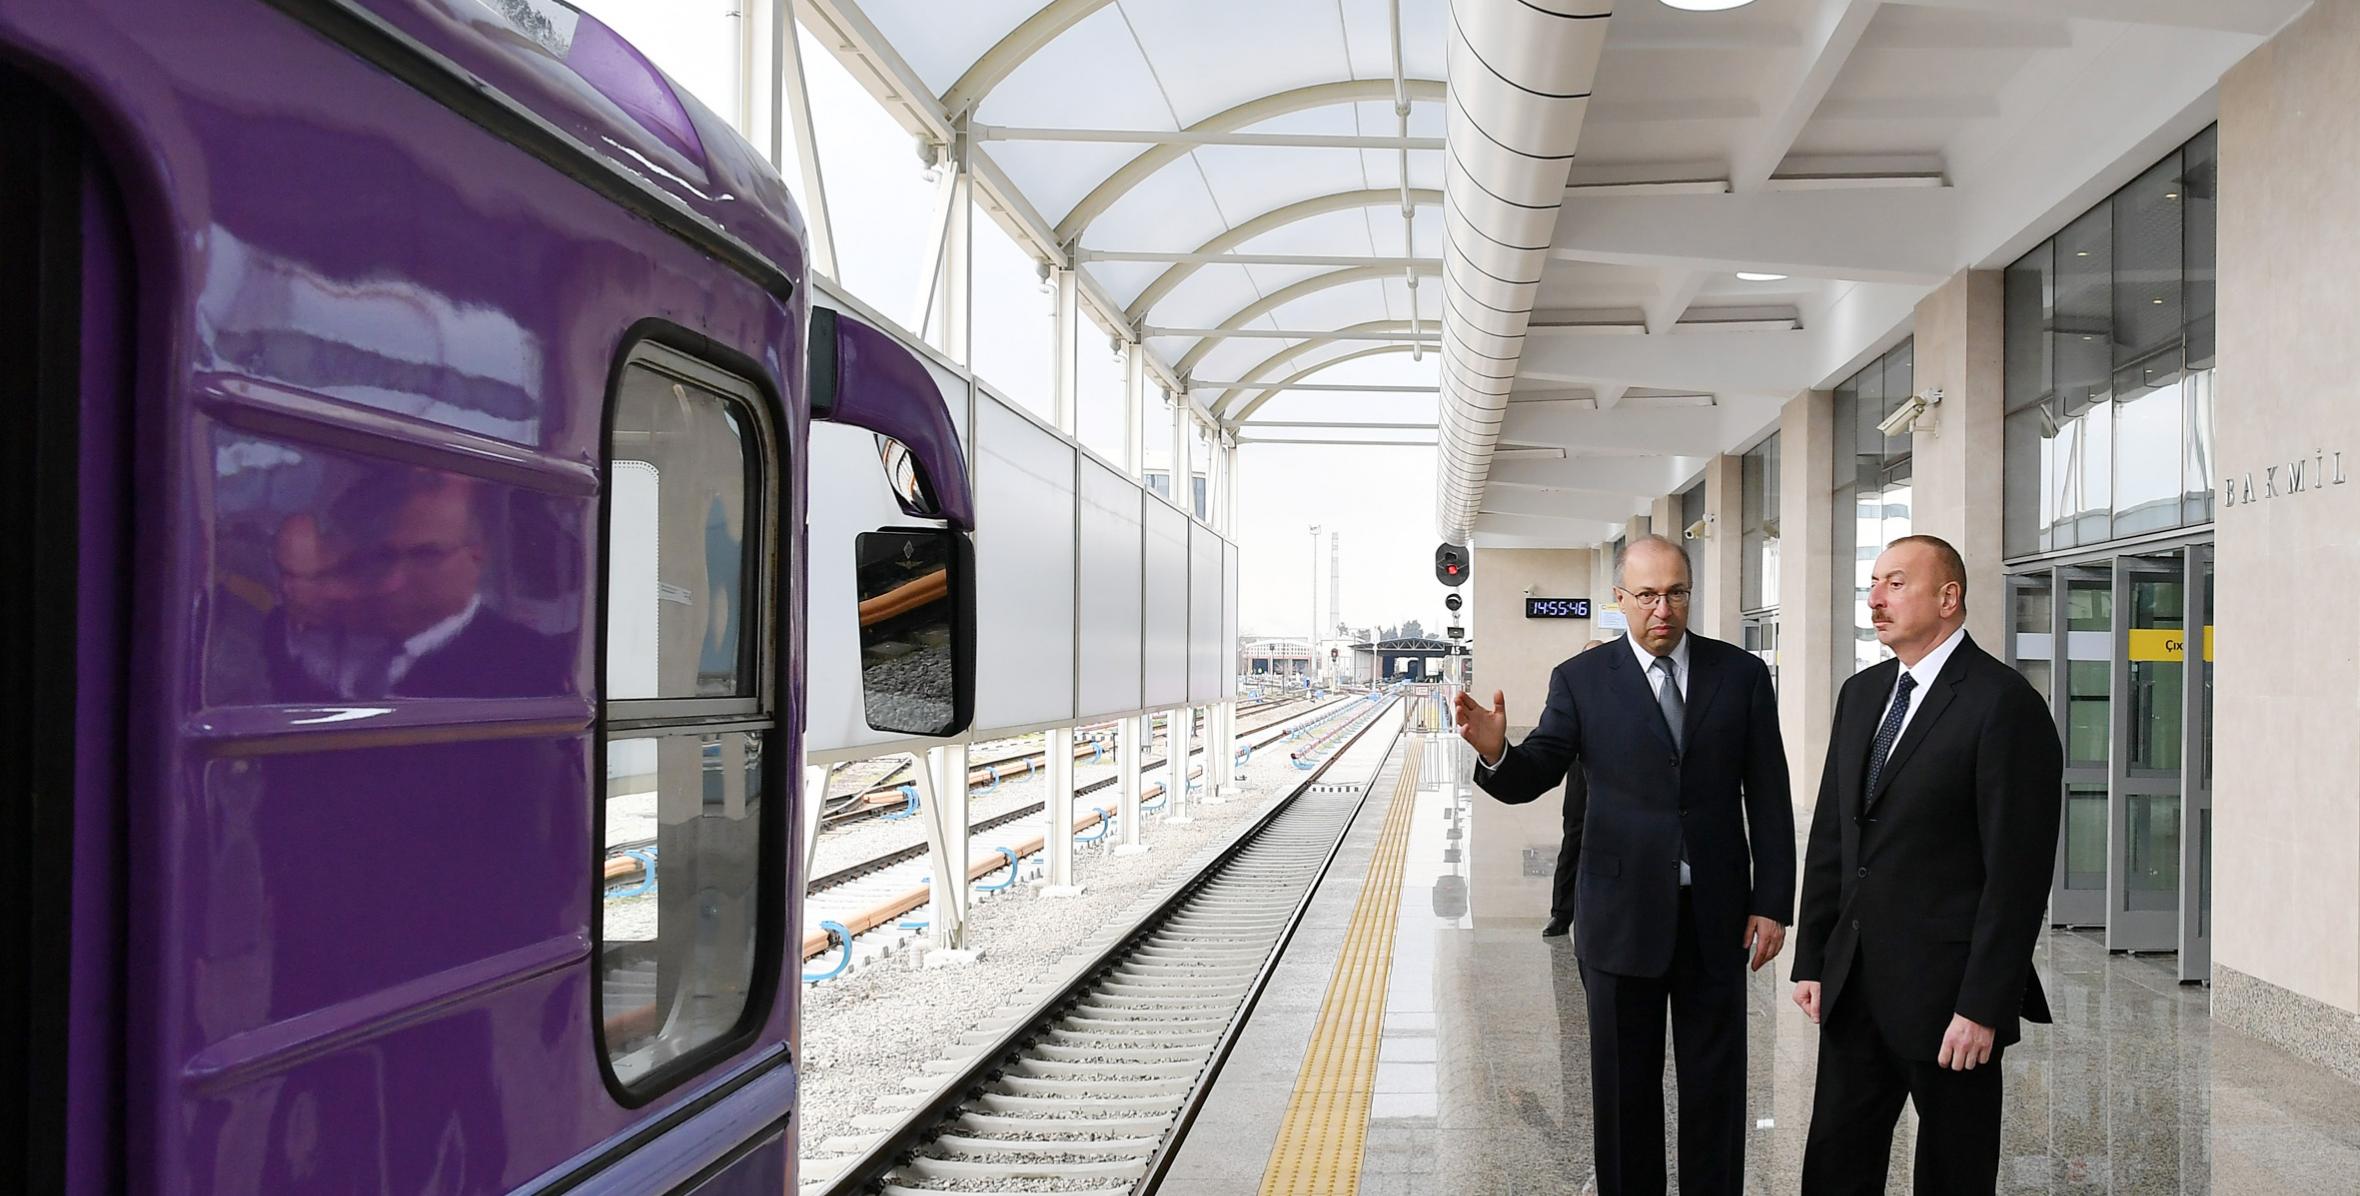 Ilham Aliyev viewed conditions created at Bakmil station of Baku Metro after major overhaul